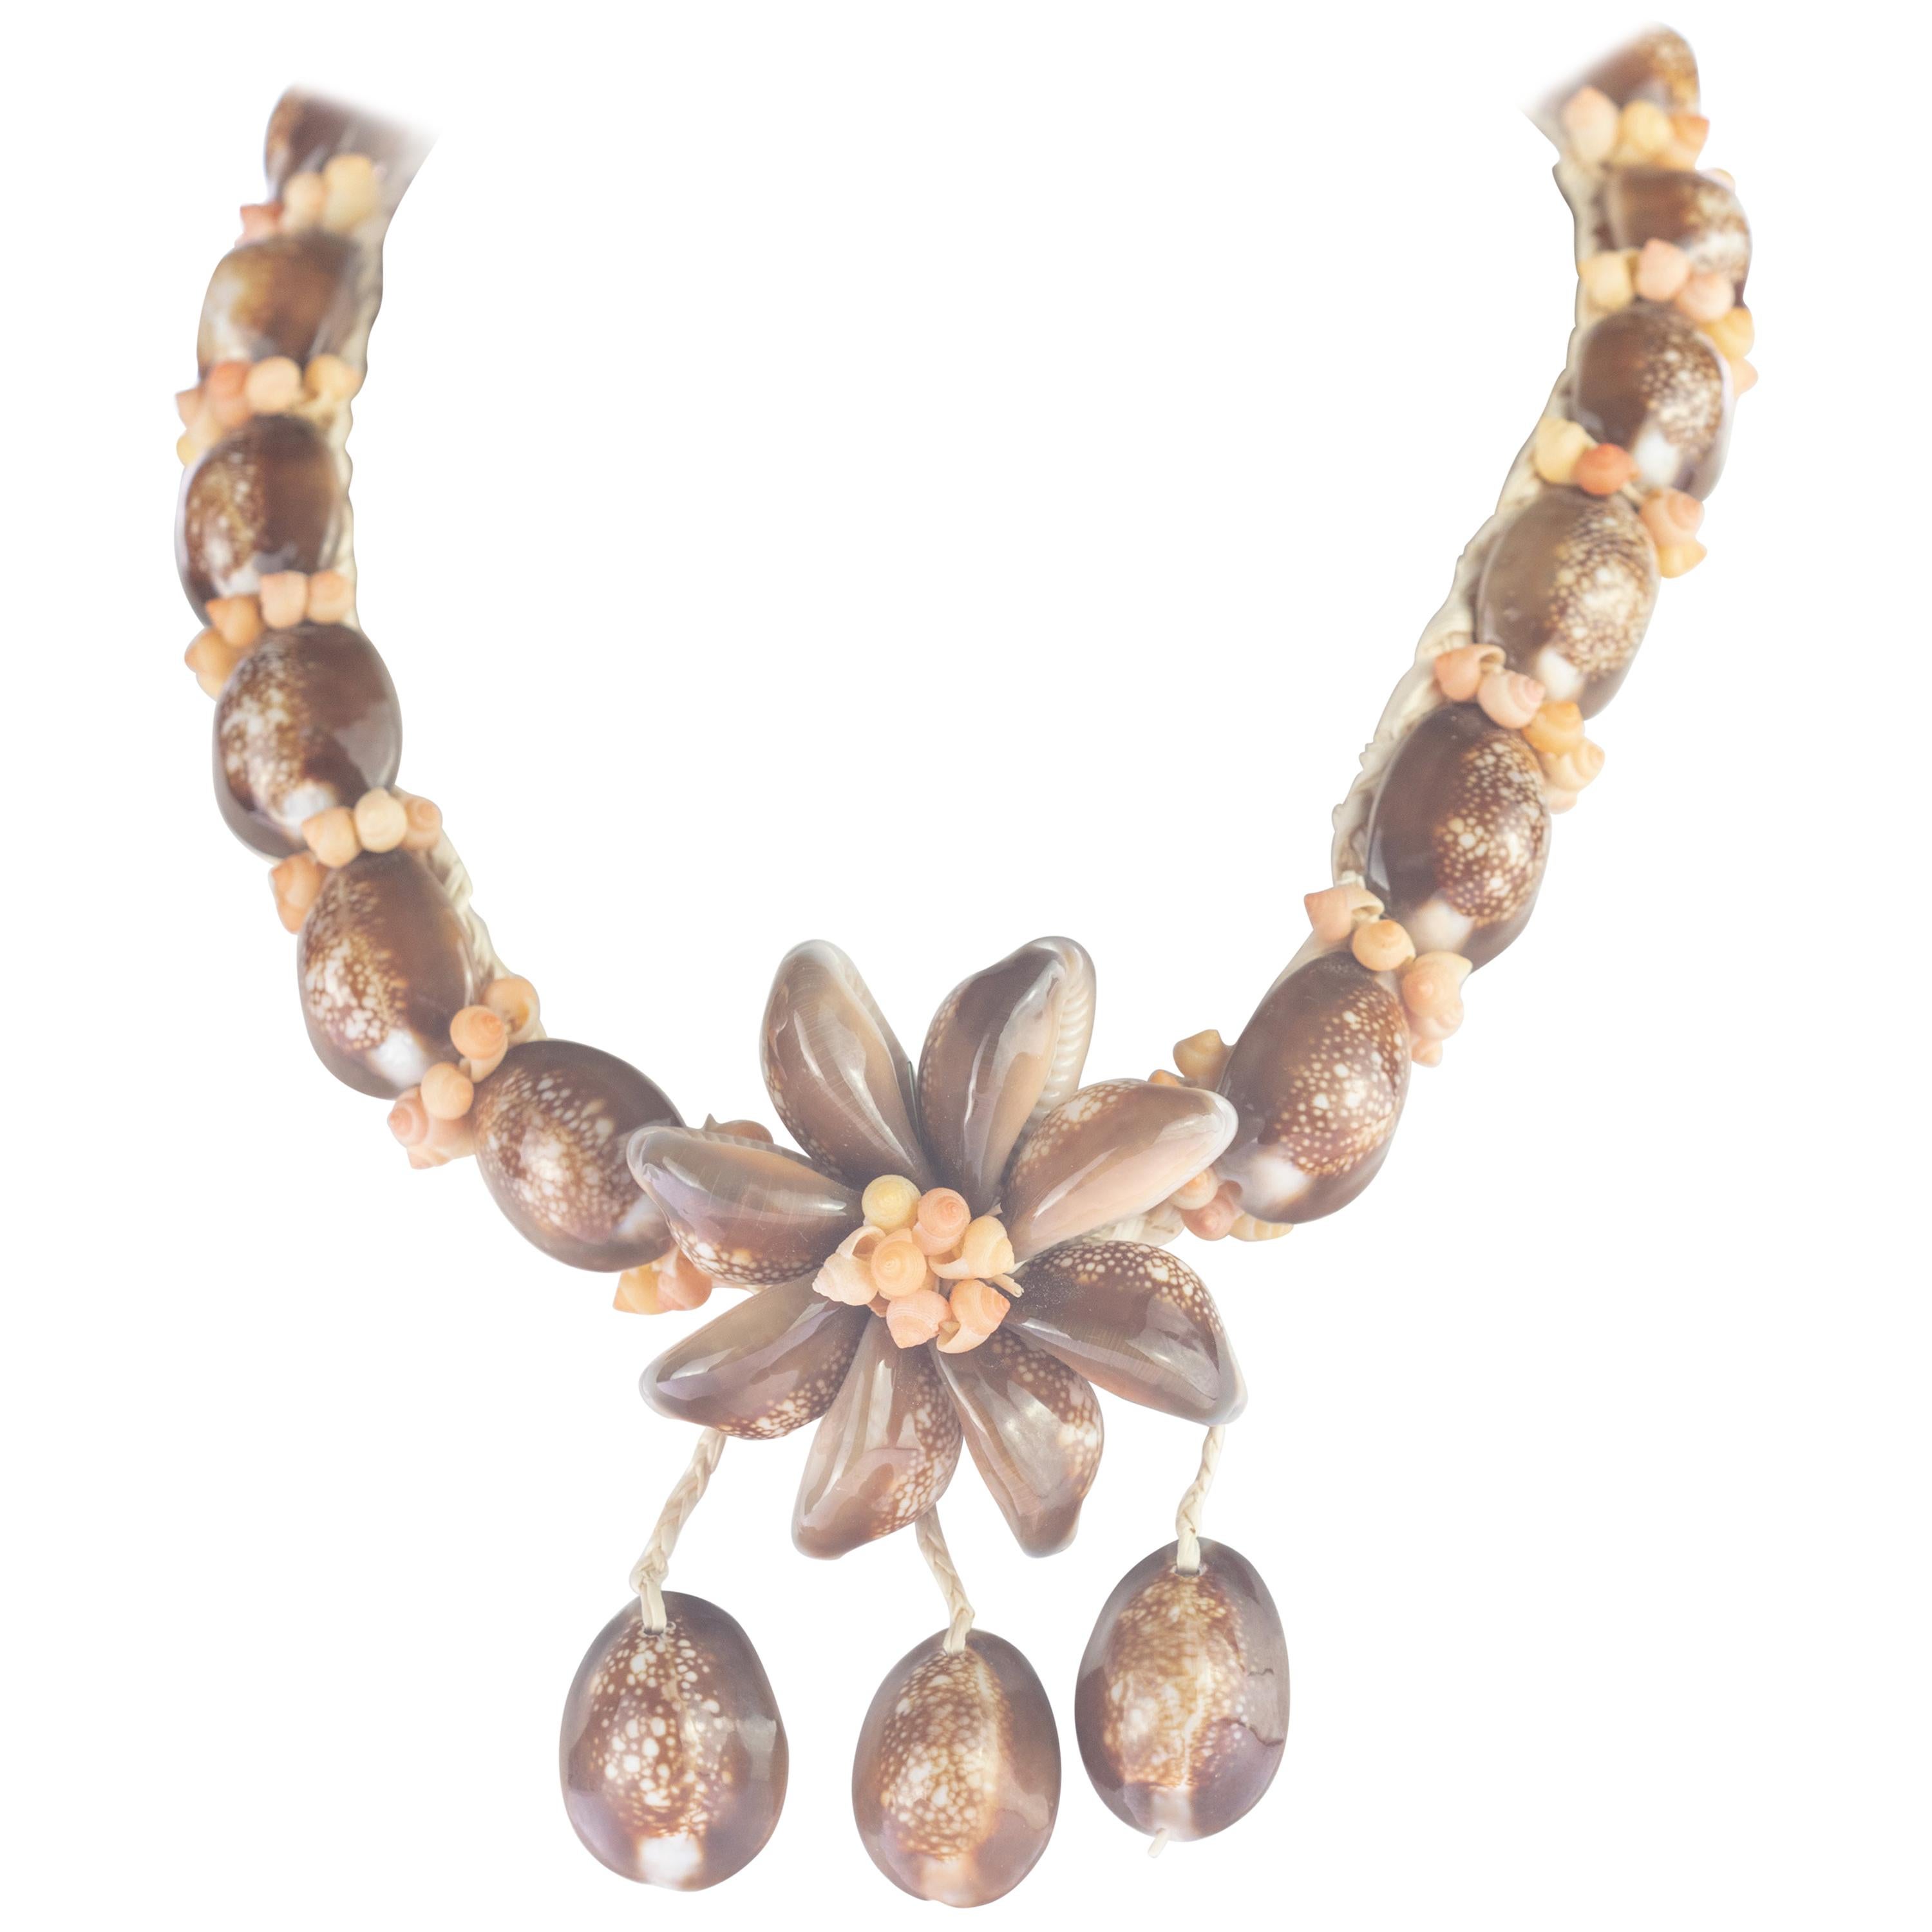 Handmade Colorful Sea Shell Freshwater Pearl Floral Necklace